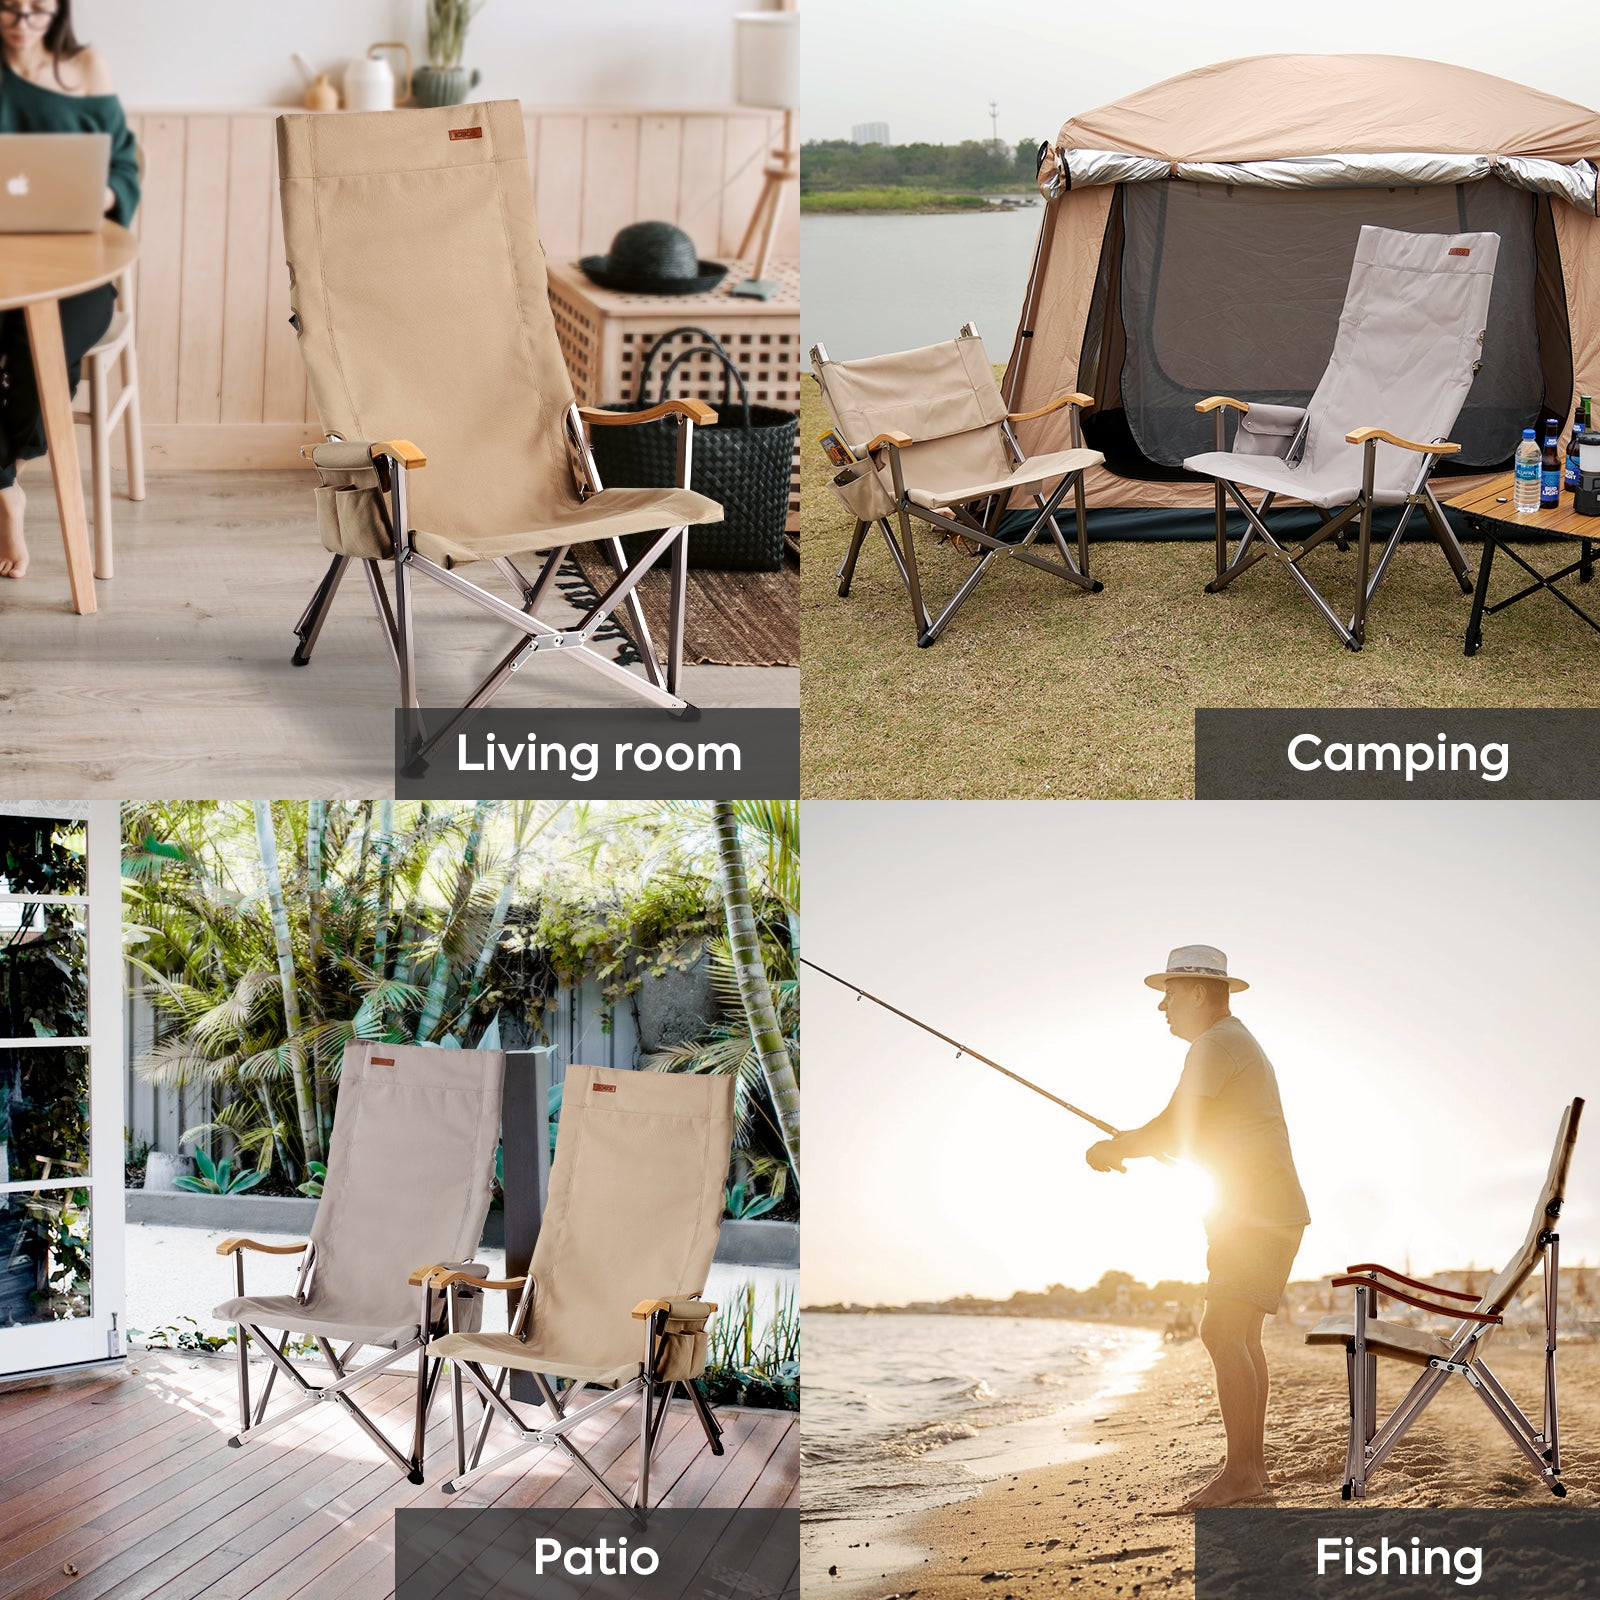 High-Back Camping Chair | ICECO, Grey